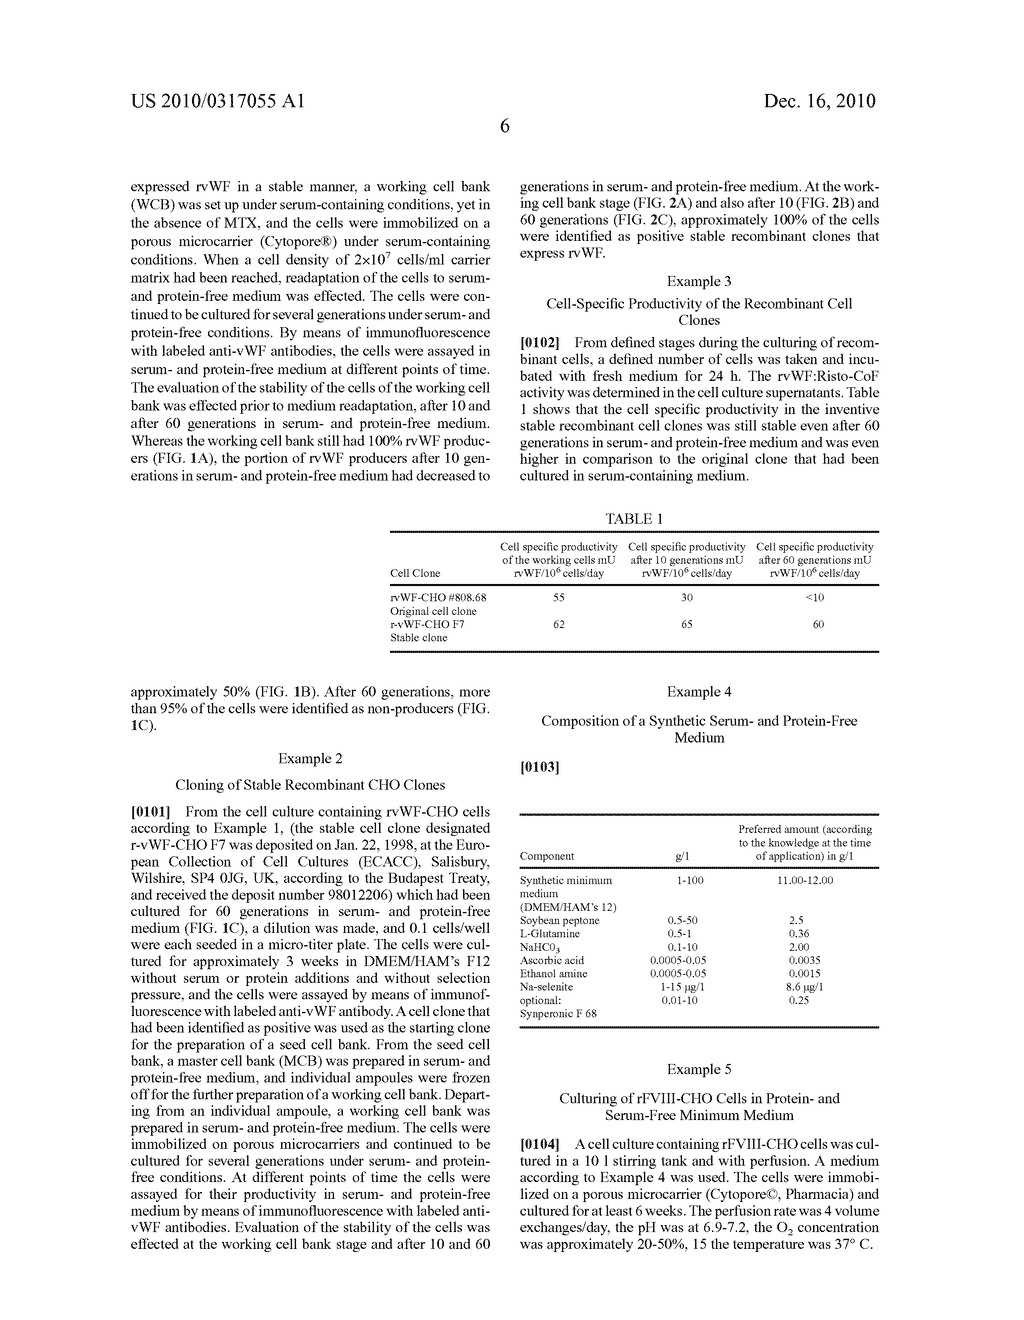 Recombinant Cell Clones Having Increased Stability and Methods of Making and Using the Same - diagram, schematic, and image 10